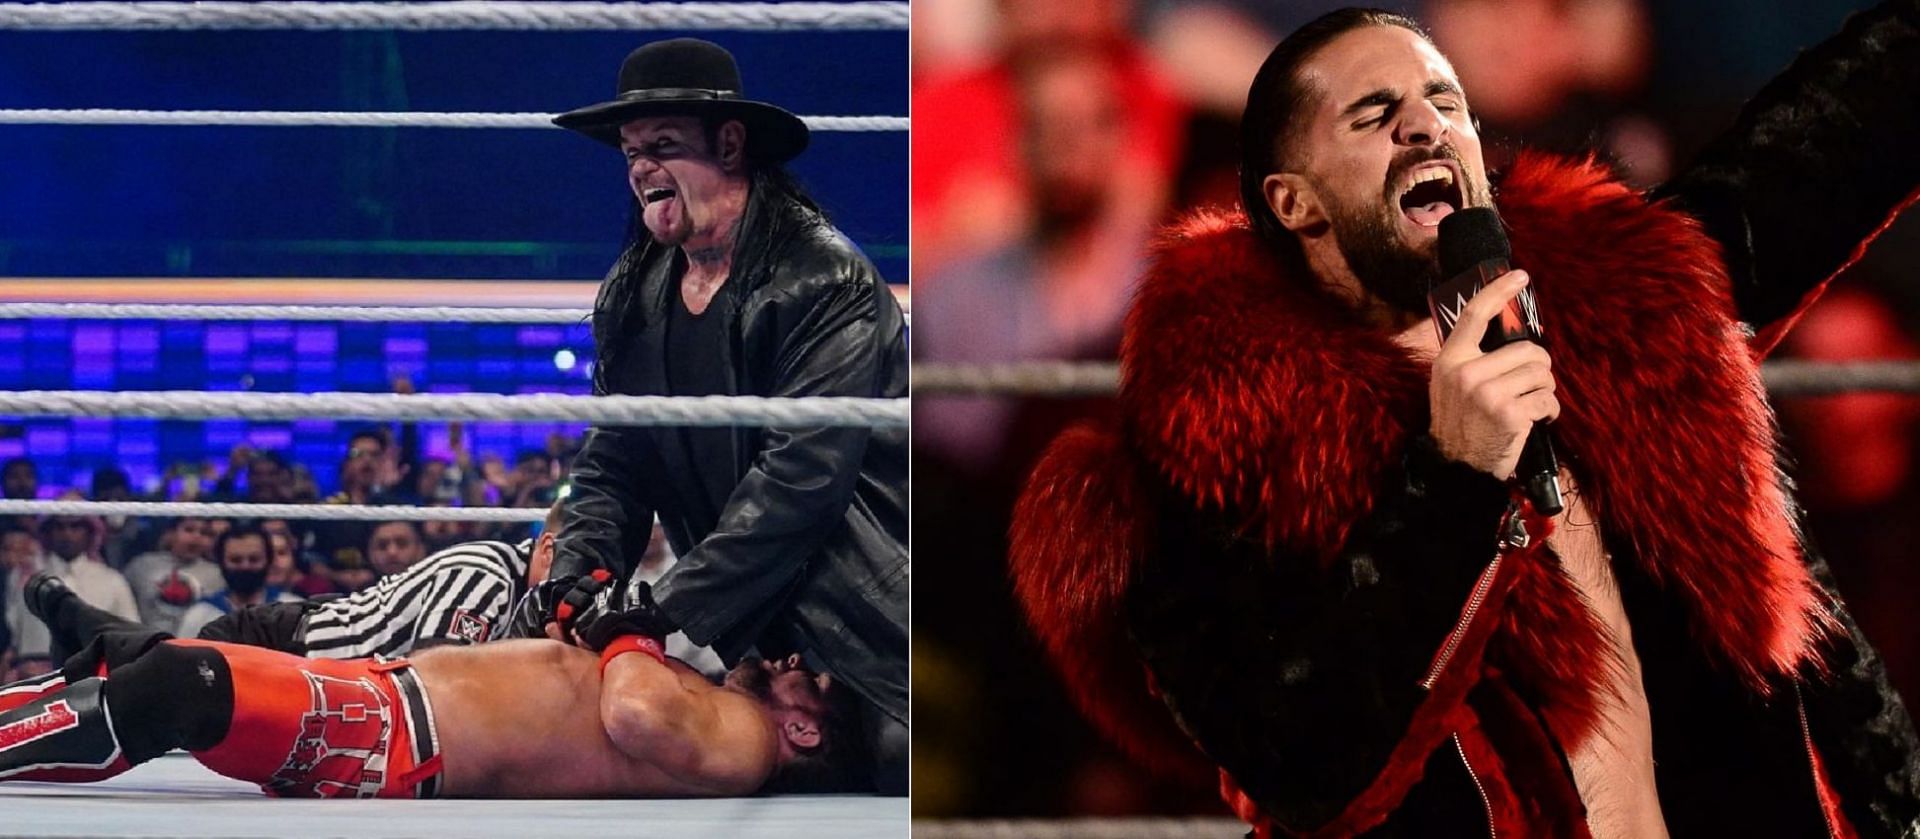 Several WWE Superstars have exchanged gifts with their opponents following high-profile matches